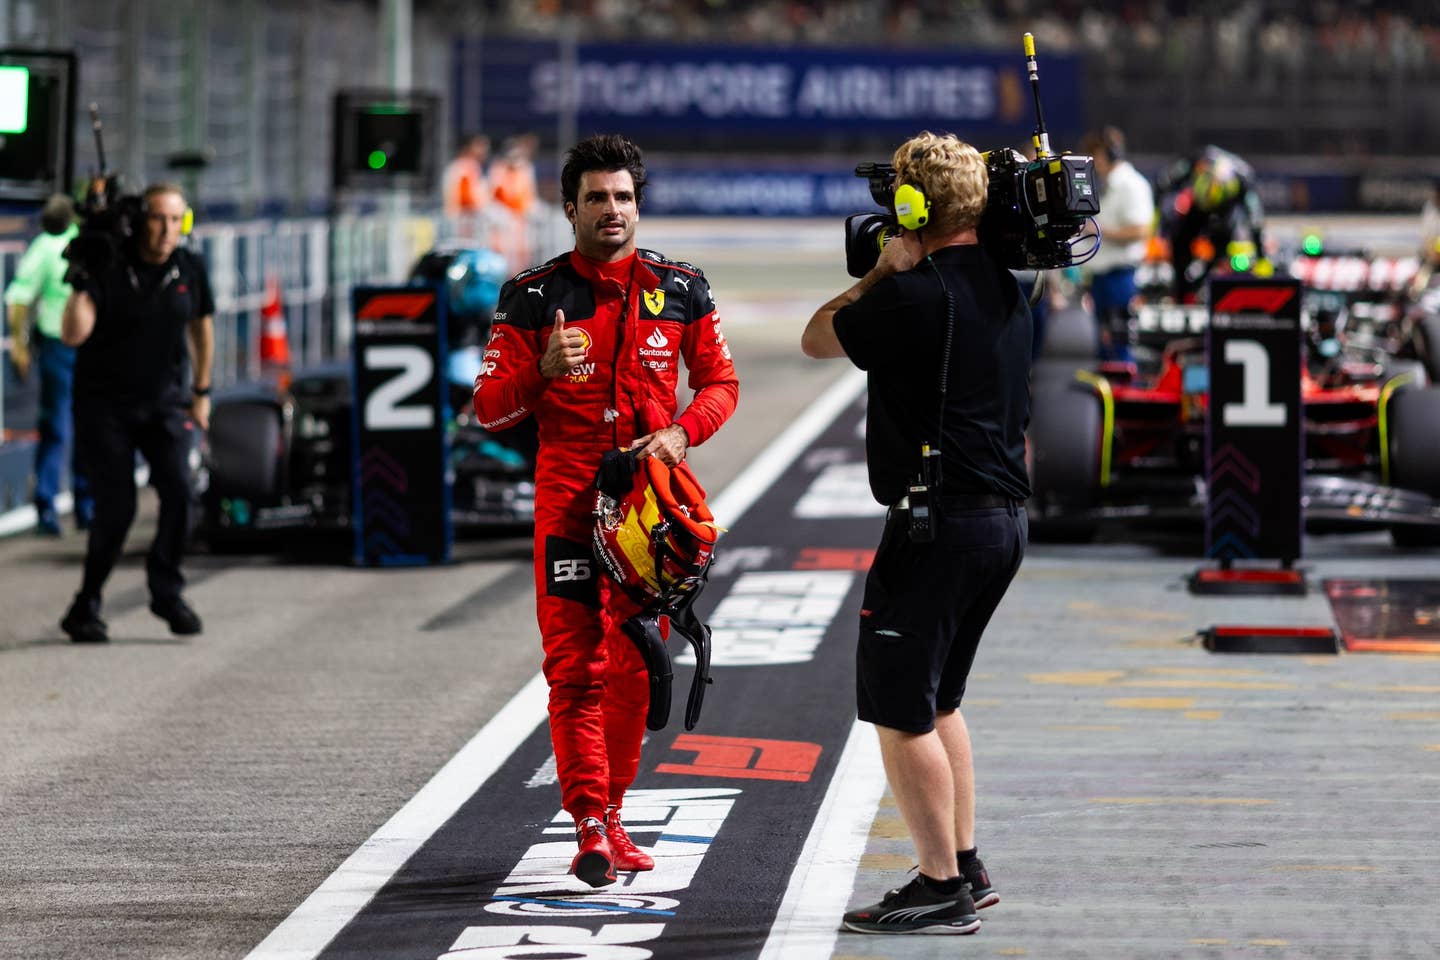 SINGAPORE, SINGAPORE - SEPTEMBER 16: Pole position qualifier Carlos Sainz of Spain and Ferrari celebrates in parc ferme during qualifying ahead of the F1 Grand Prix of Singapore at Marina Bay Street Circuit on September 16, 2023 in Singapore, Singapore. (Photo by Clive Rose/Getty Images)